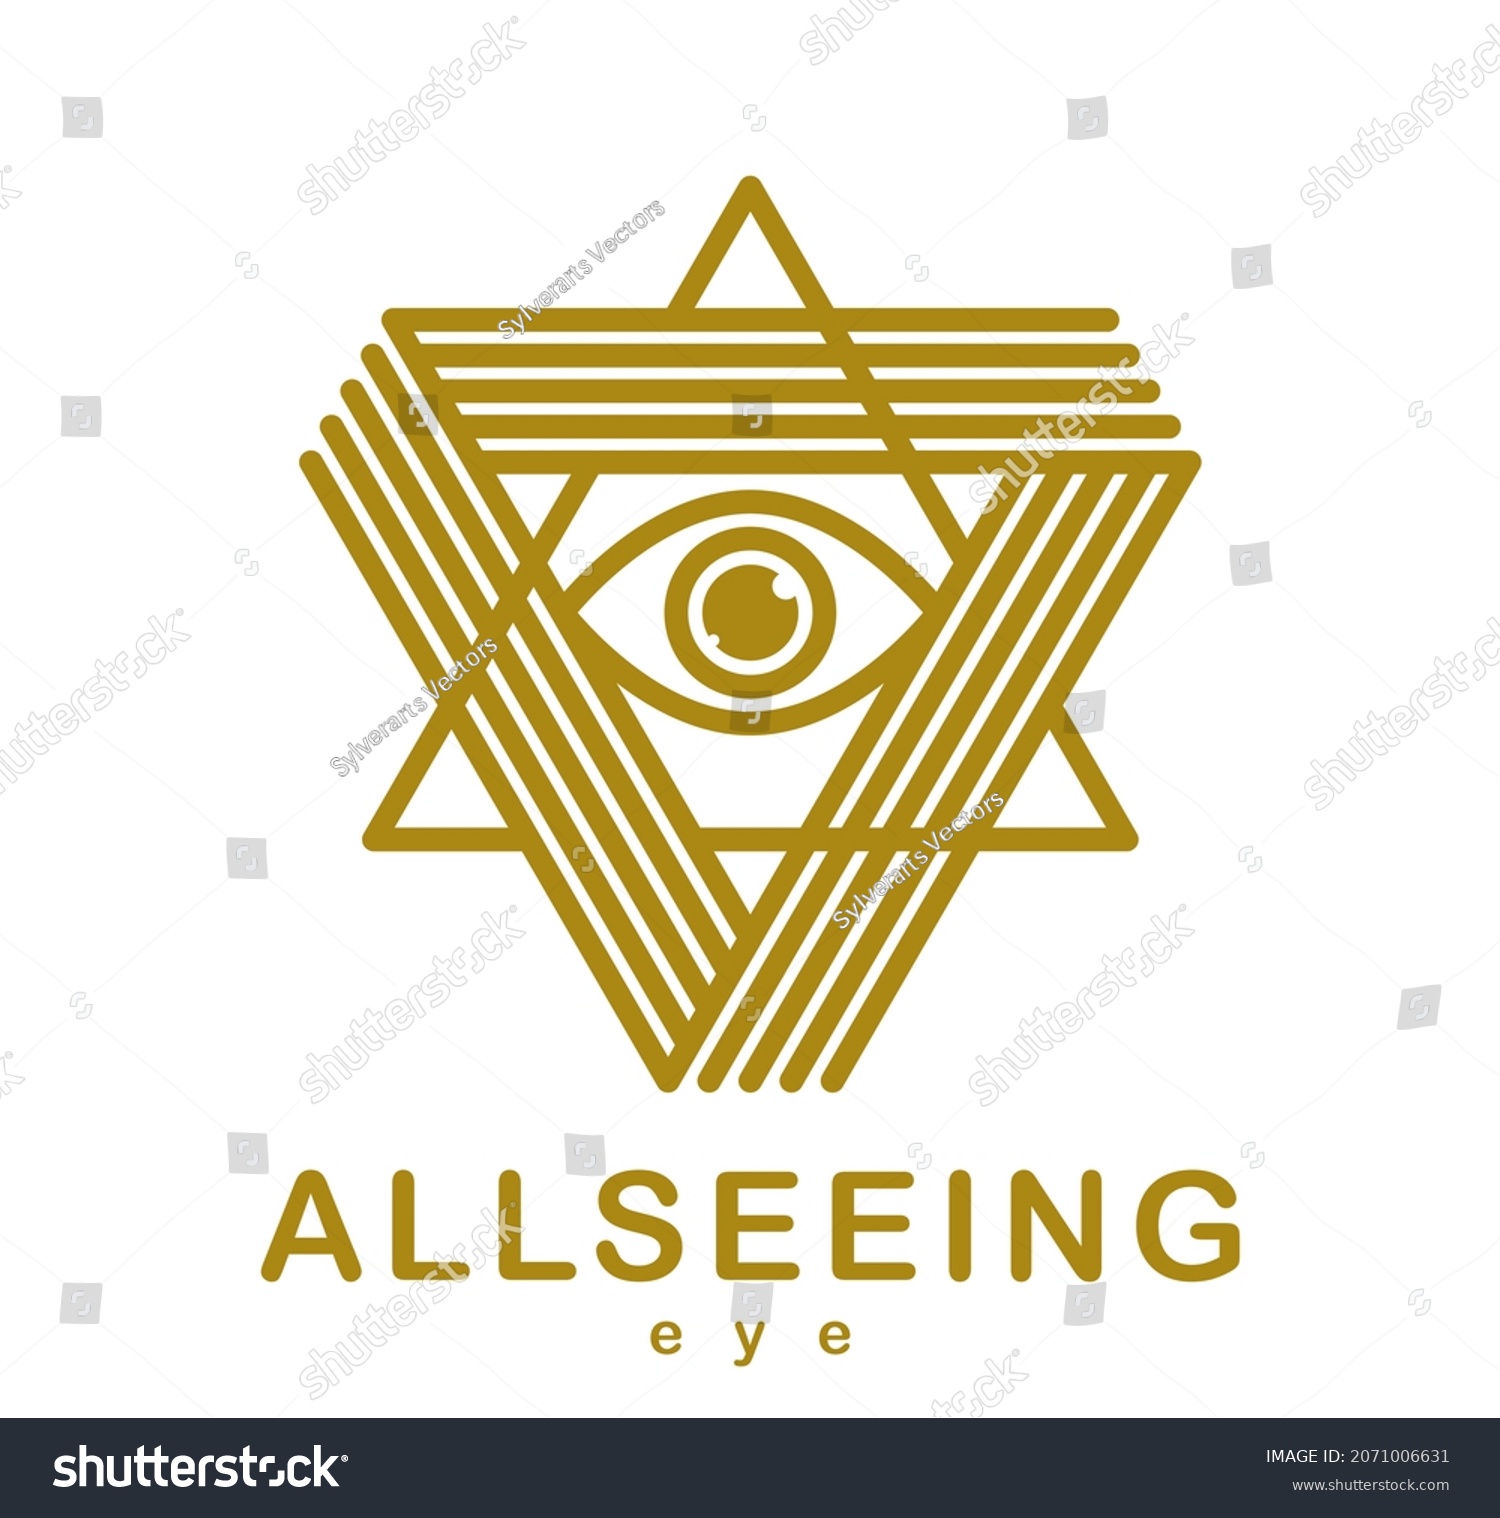 All Seeing Eye Triangle Pyramid Vector Stock Vector Royalty Free 2071006631 Shutterstock 4172